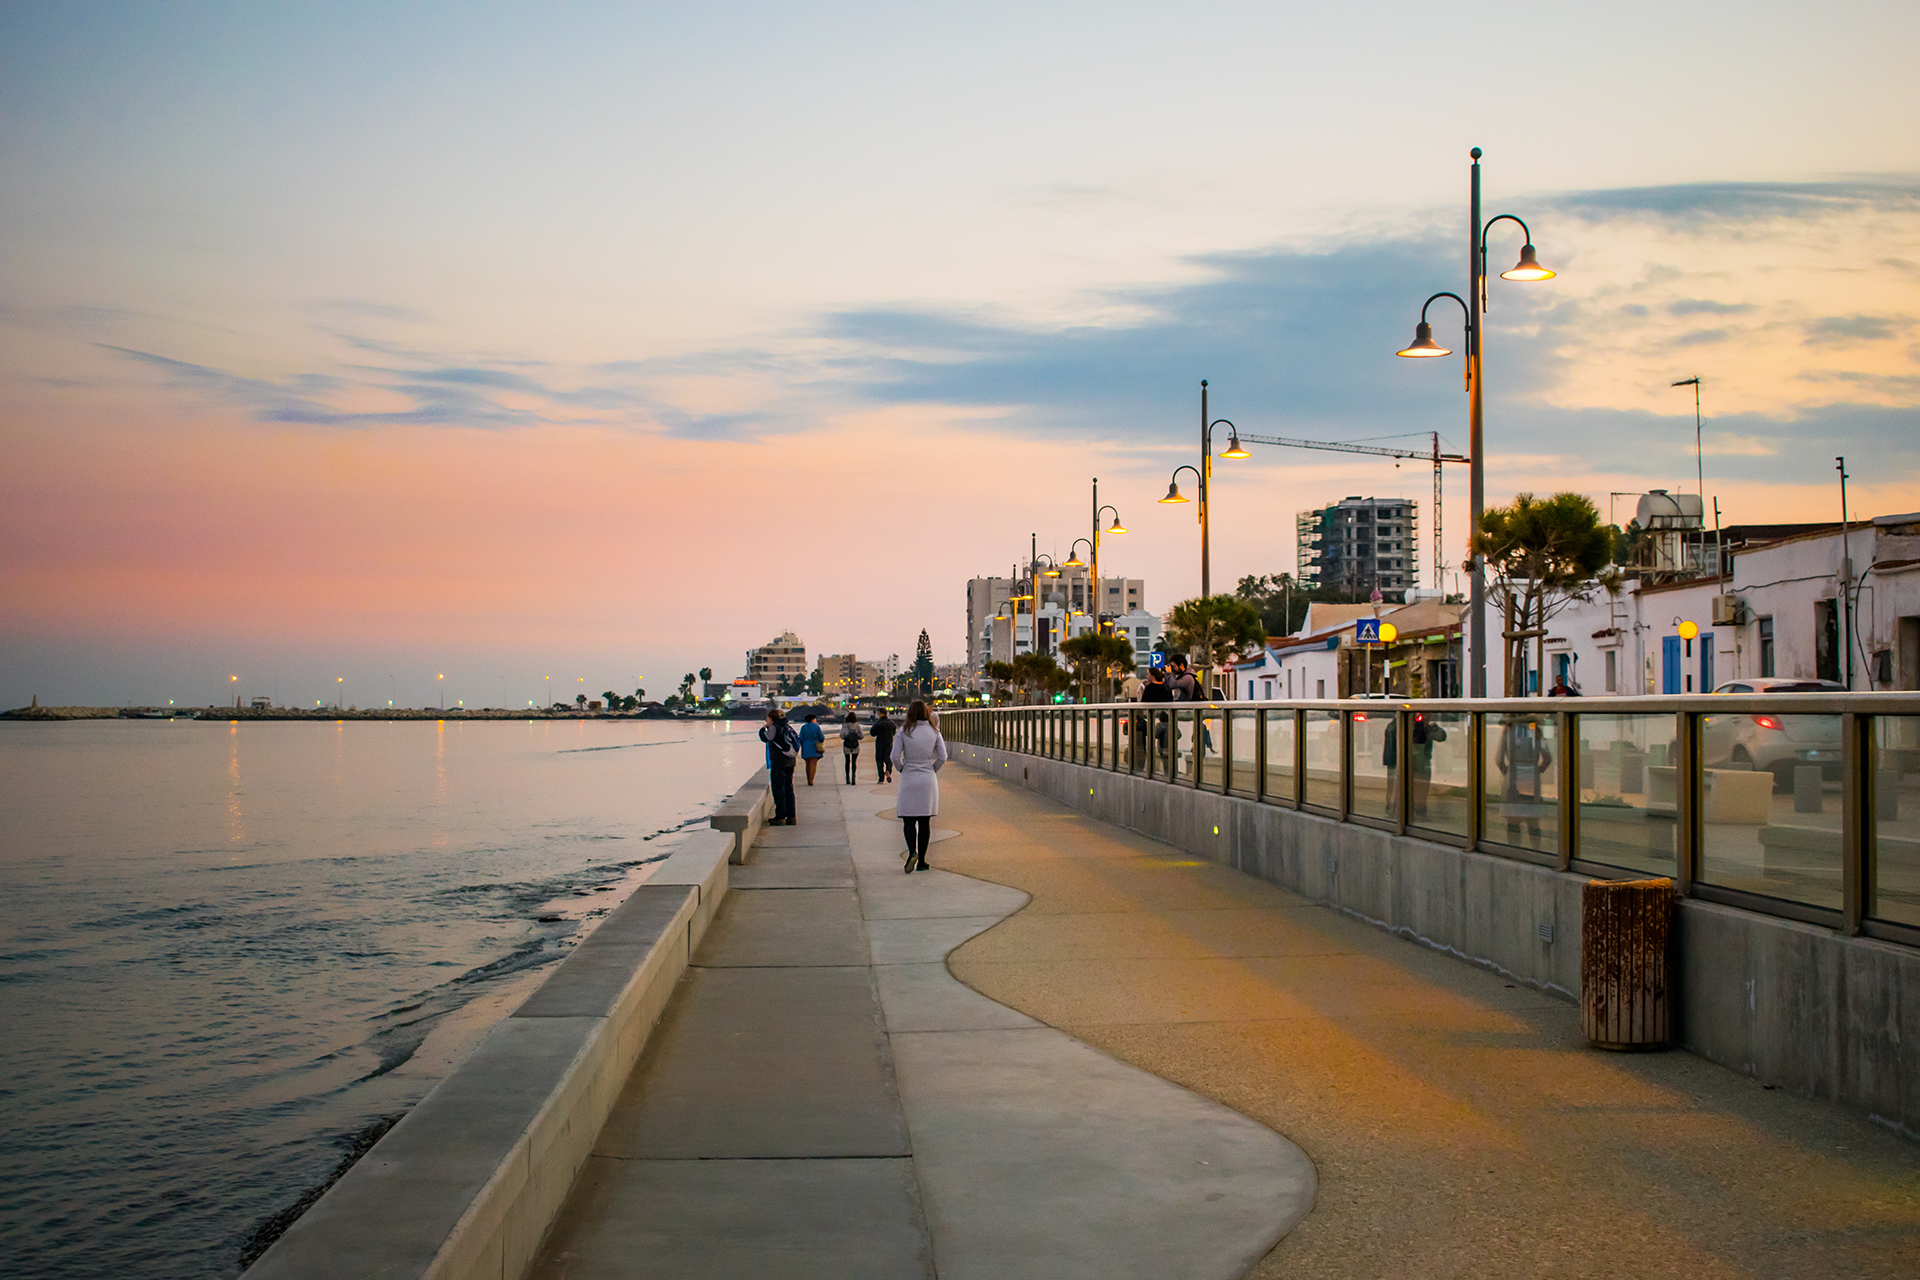 Piale Pasha Promenade is being renovated by the Larnaca Municipality